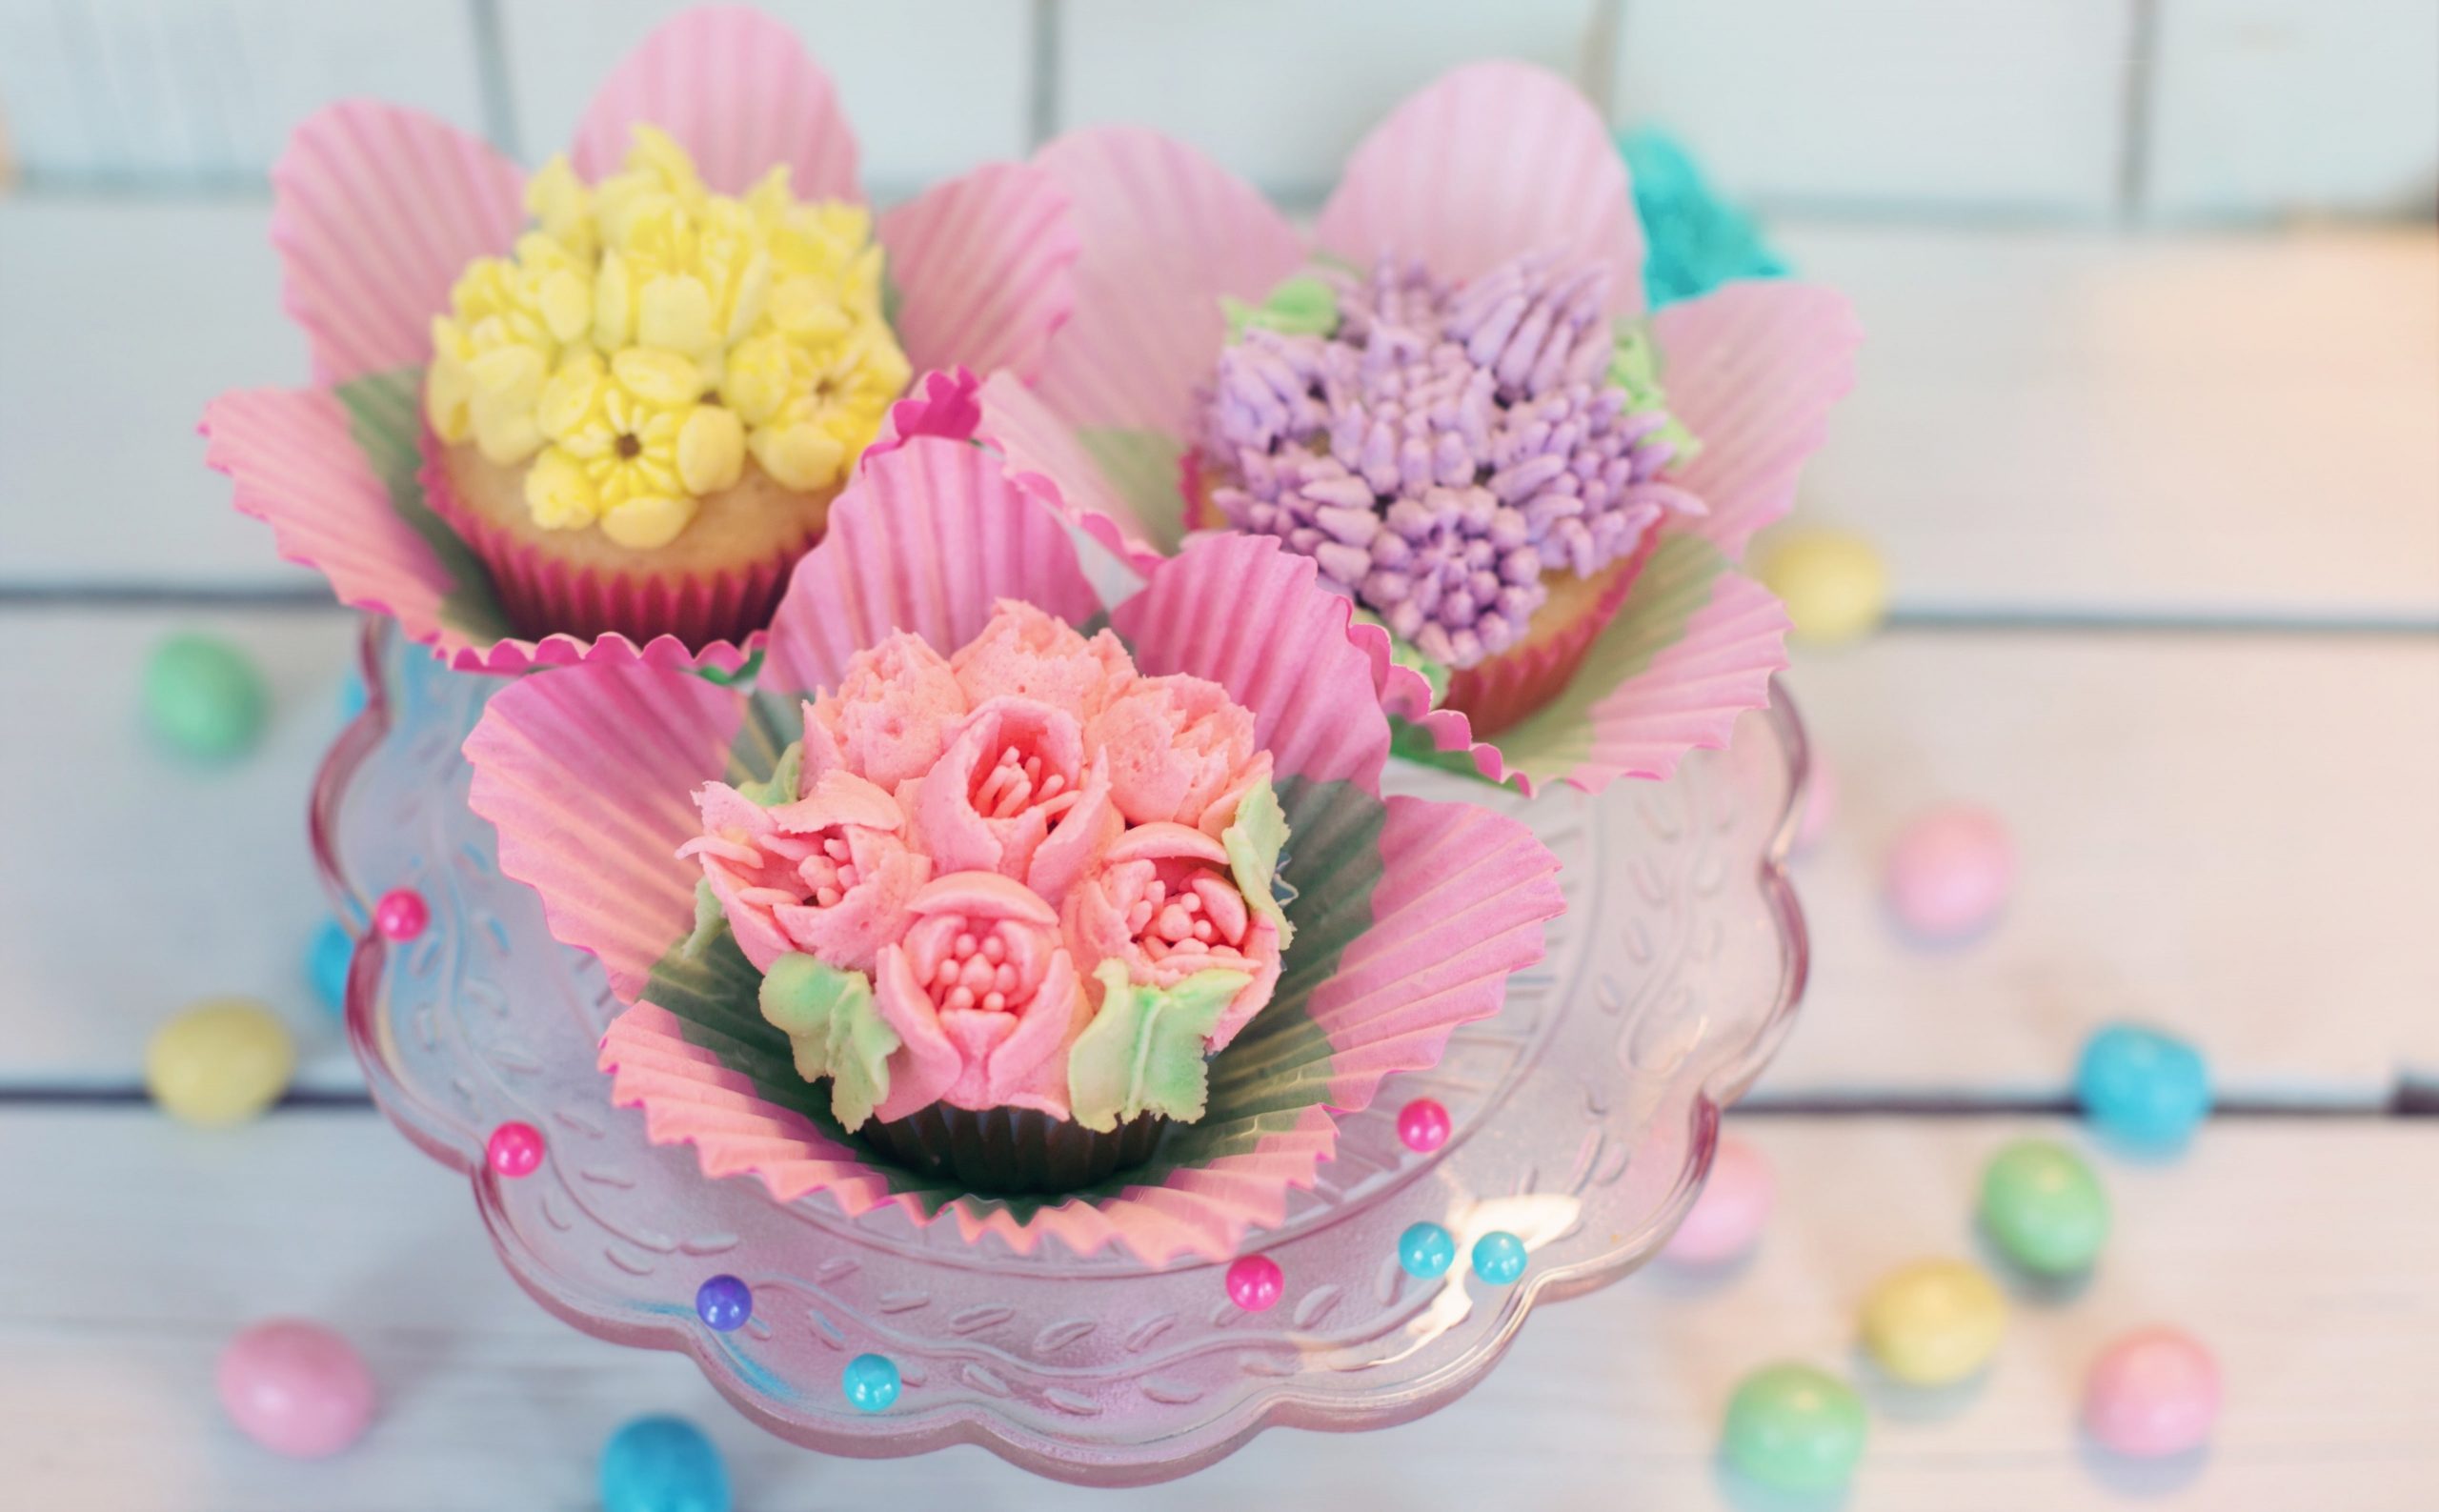 Spring Ice Cream Cupcakes wallpaper, Food and Drink, Colorful, Easter, Season